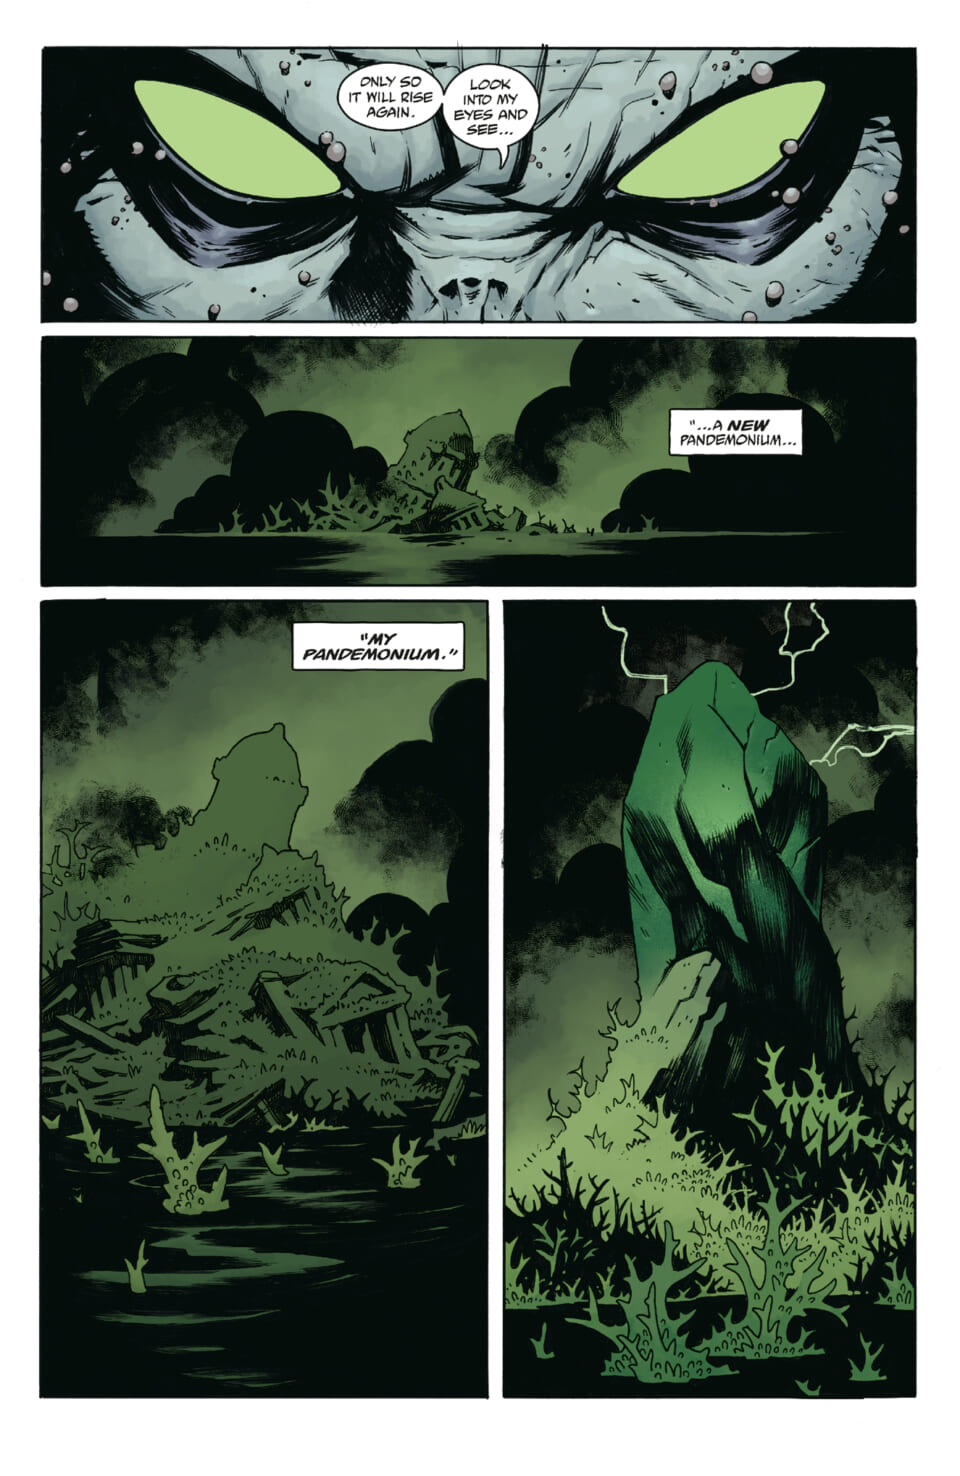 KOSIH i2 PR BKP 3 960x1476 - 'Koshchei In Hell' Exclusive: Get A Sneak Peek At Mike Mignola's Newest Comic